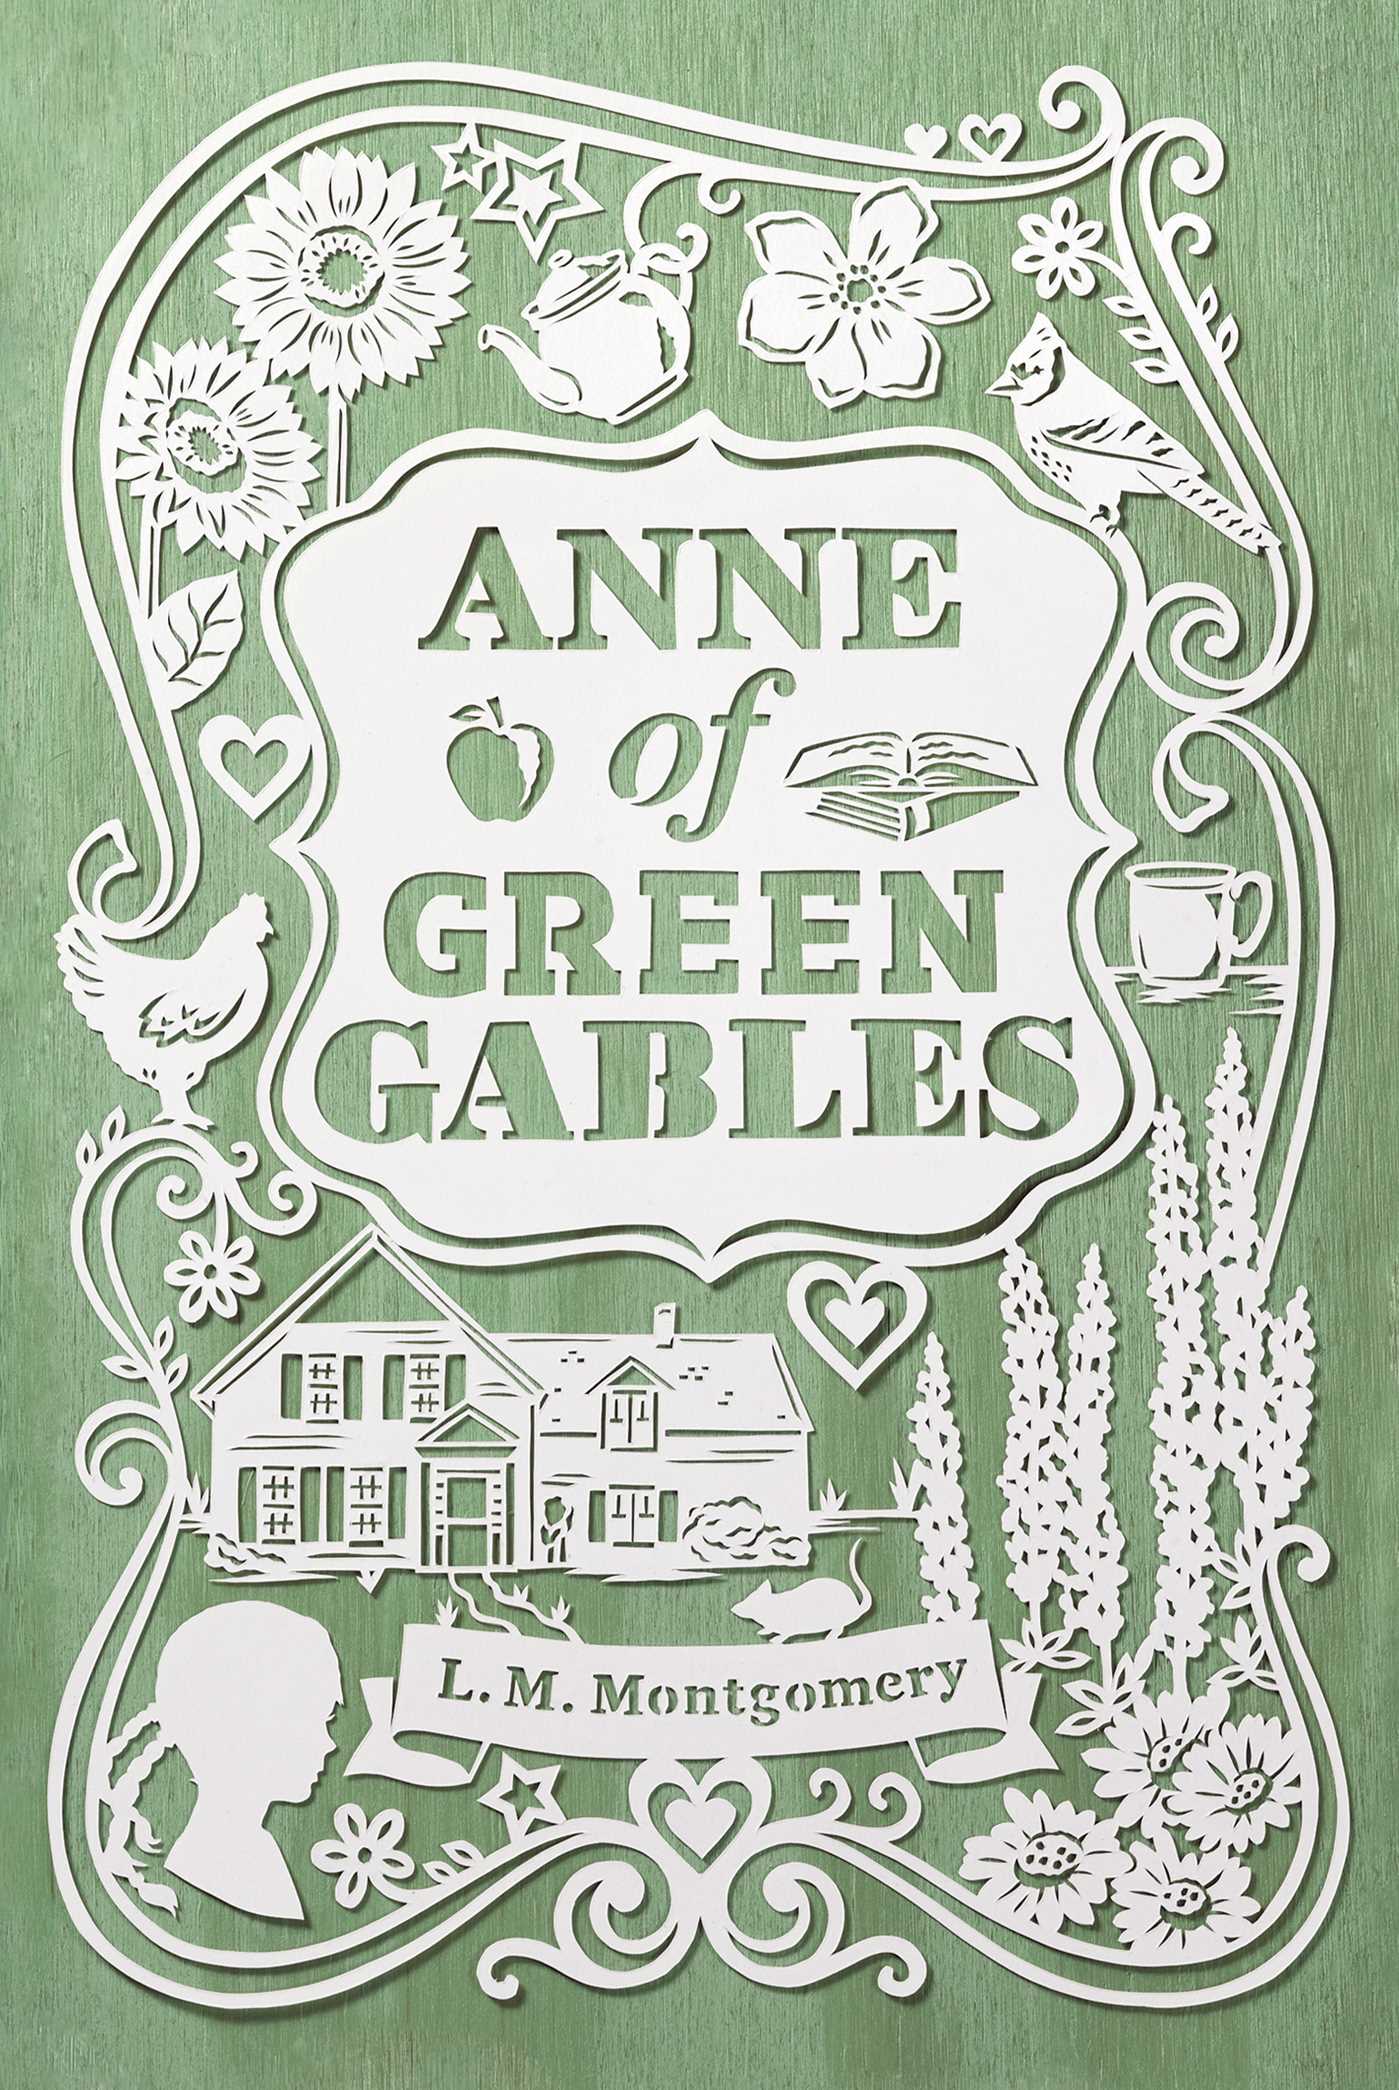 Anne of Green Gables Marketing